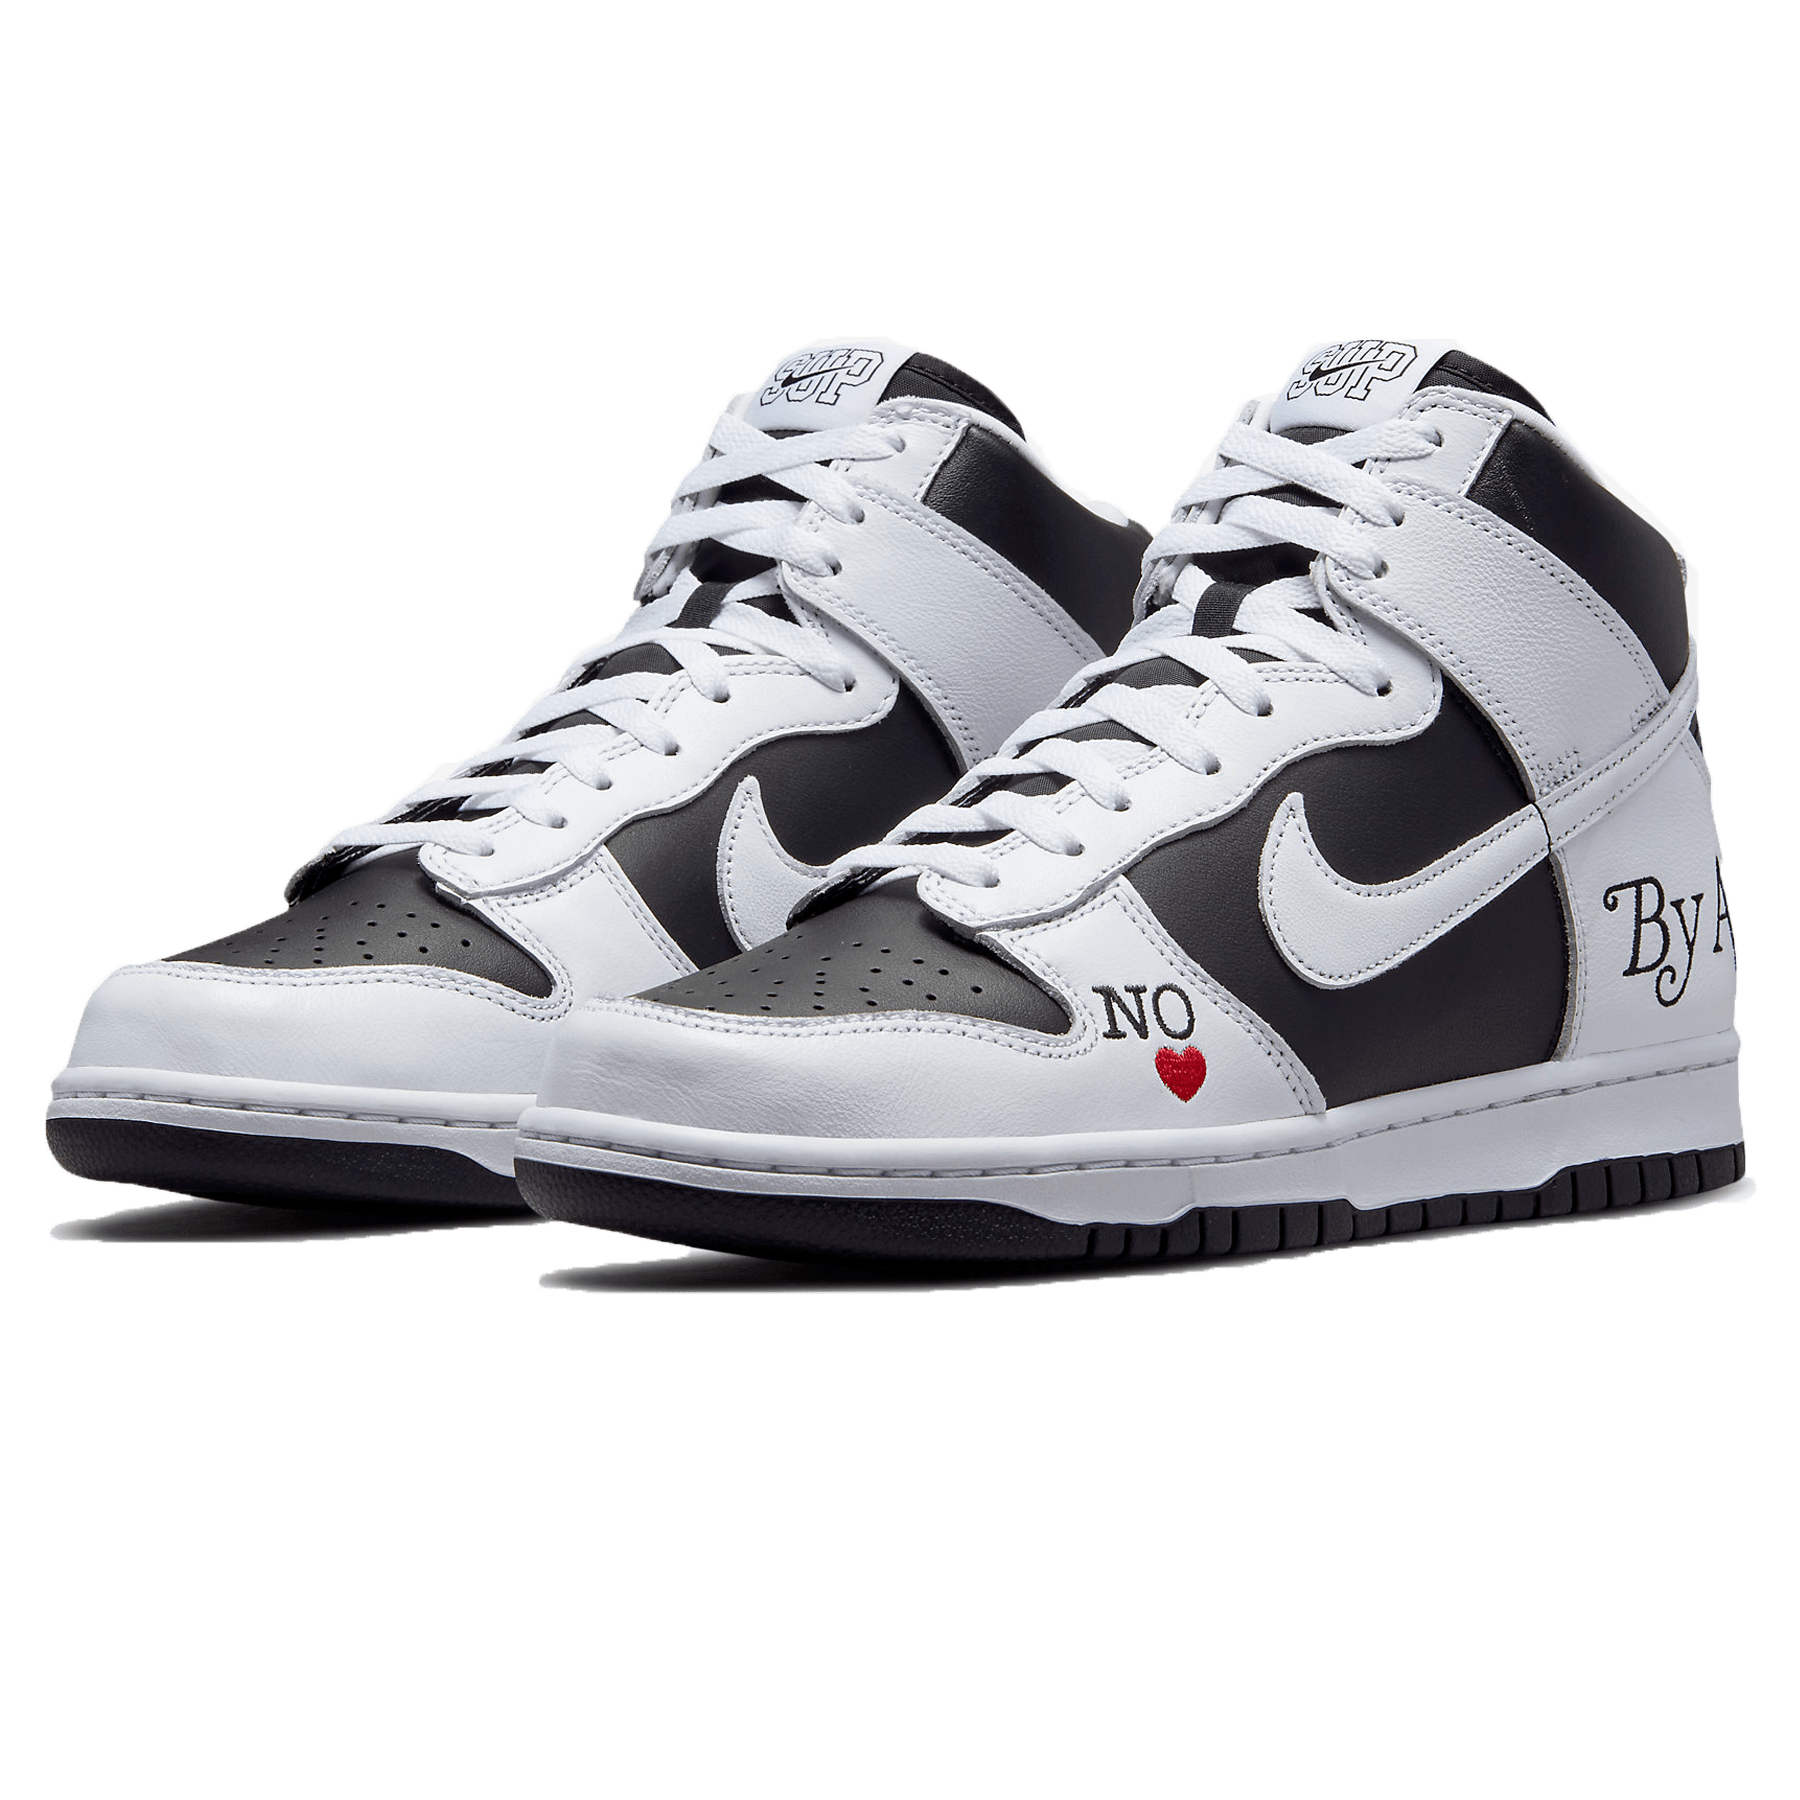 Supreme x Nike Dunk High SB 'By Any Means - Stormtrooper' —  OdoiporikonShops - nike flex show tr 5 white house